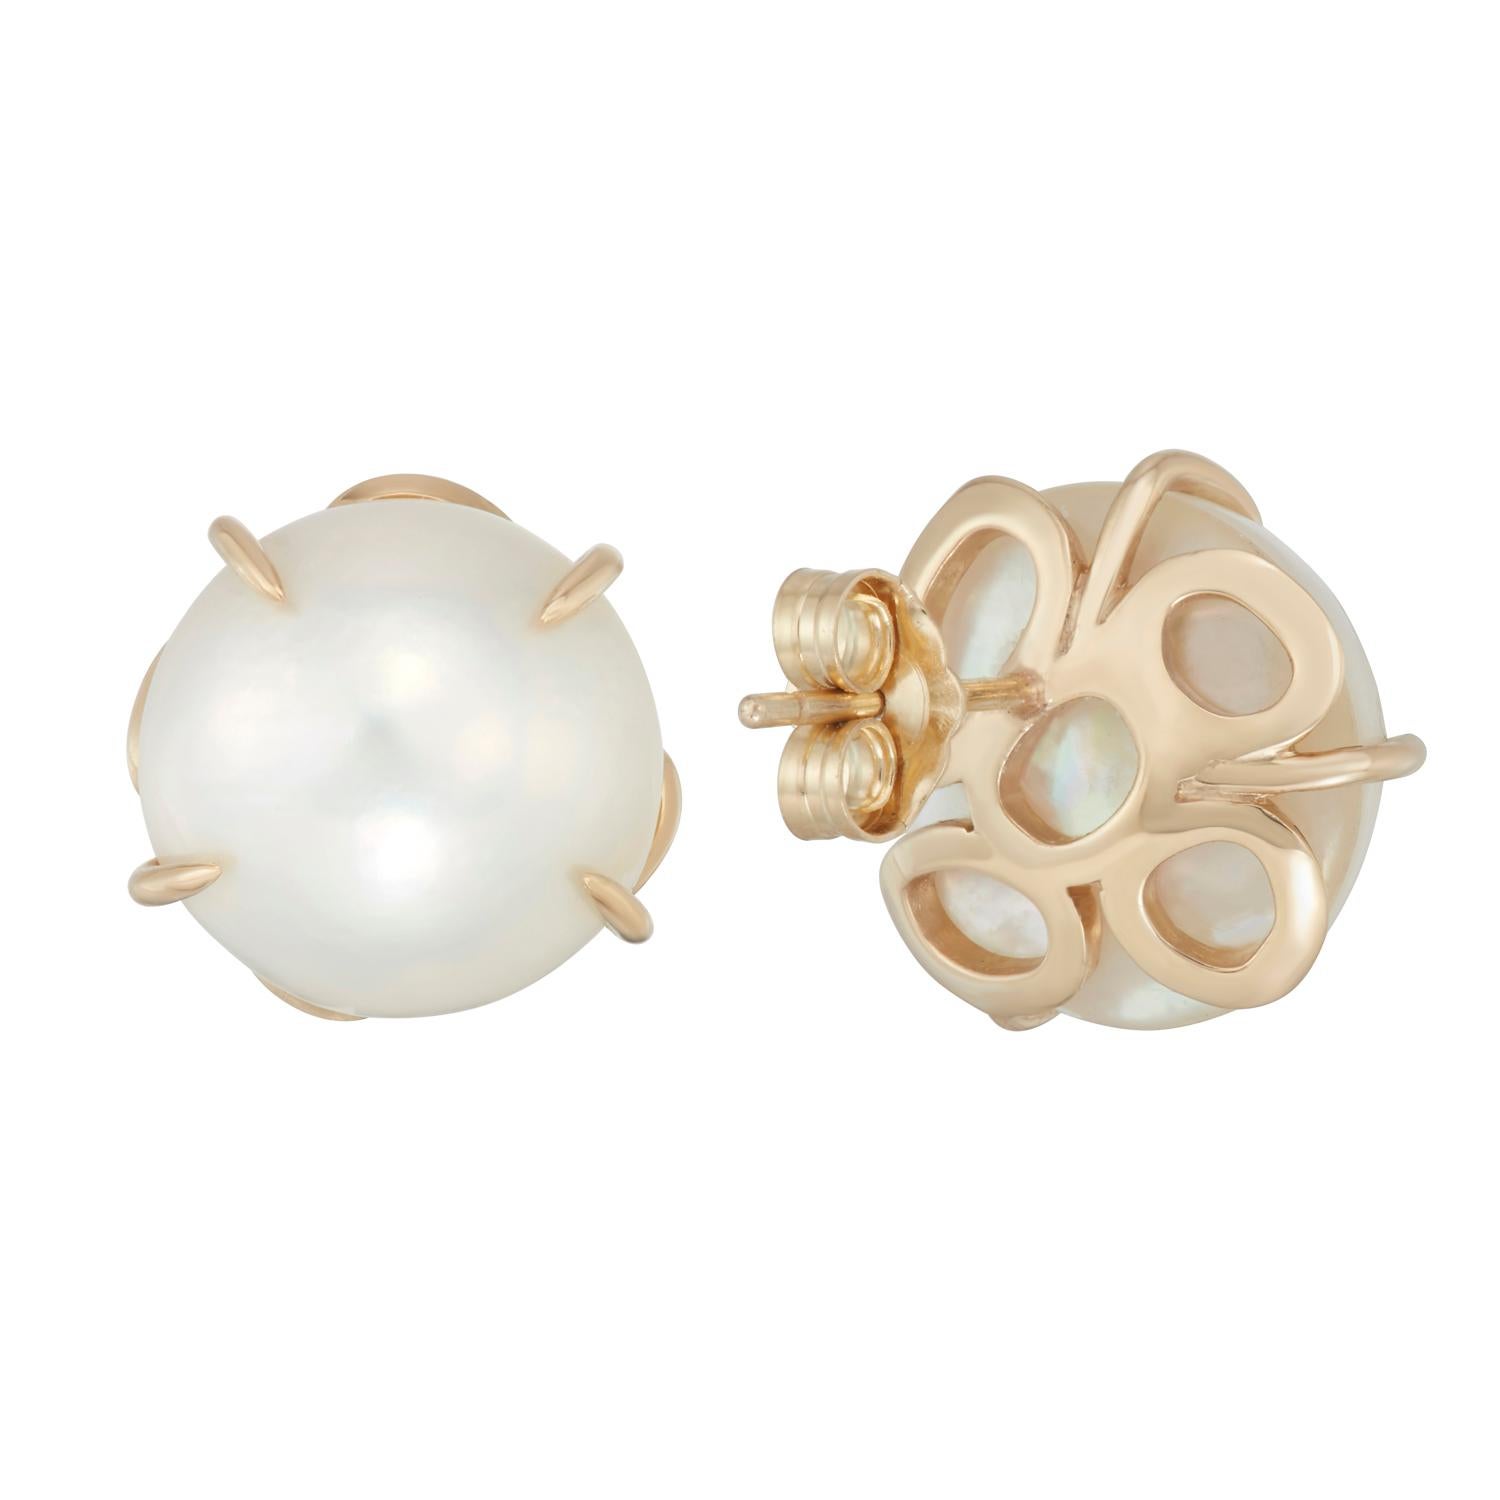 Not just your ordinary pair of pearl earrings, these bold round lustrous Mabe (pronounced May-Bay) pearls are prong set with Hi June Parker's signature organic circular elements on the back.
Wear them with your hair up or down, for any occasion to